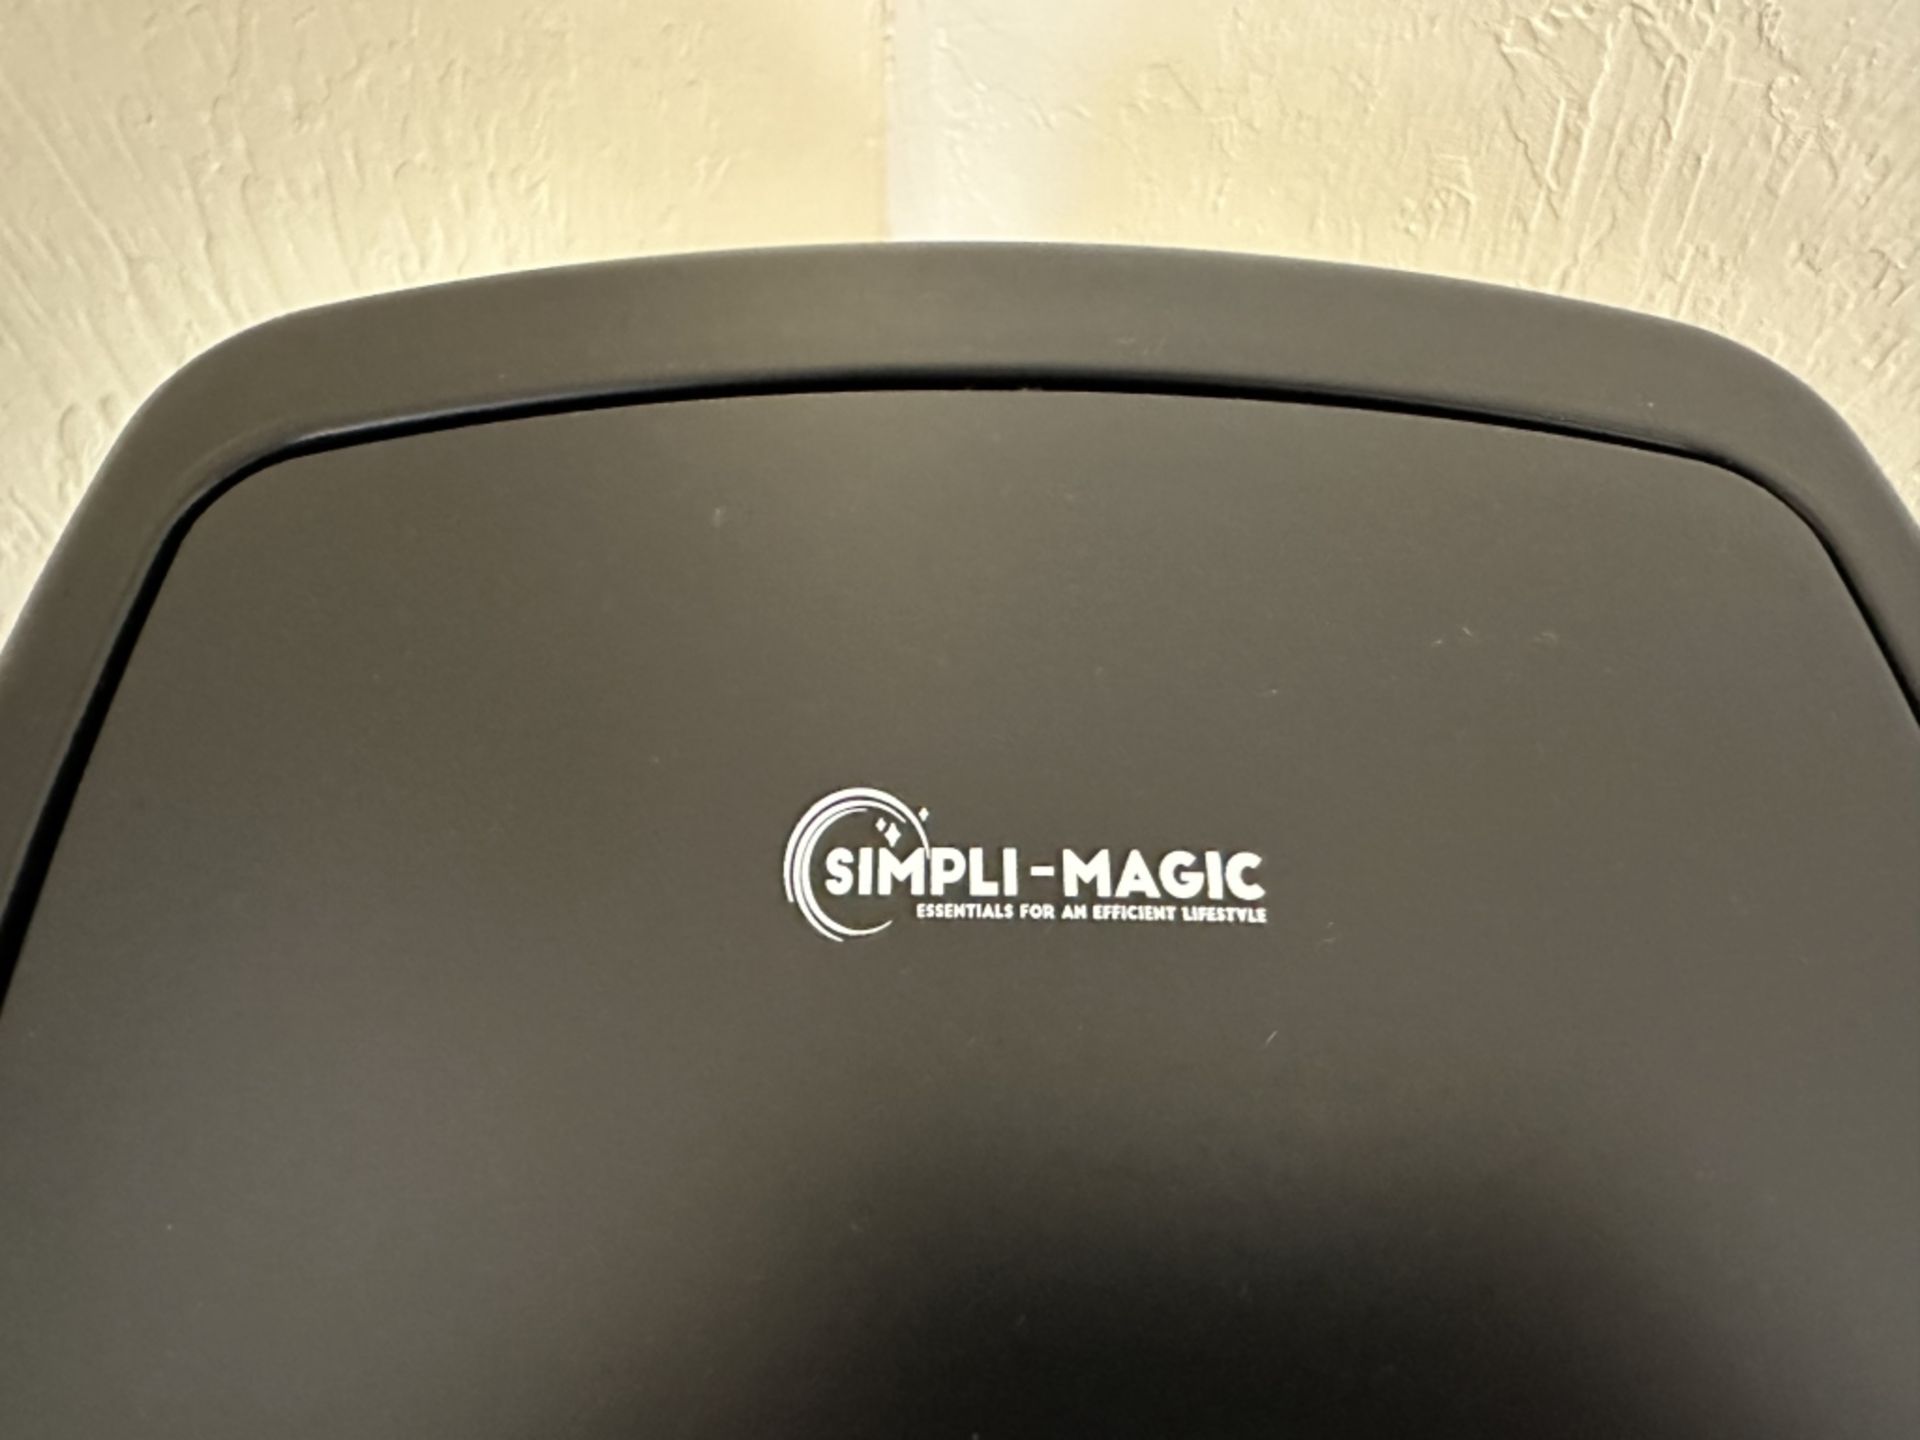 SIMPLI-MAGIC STAINLESS STEEL AUTOMATIC TRASH CAN - Image 3 of 3